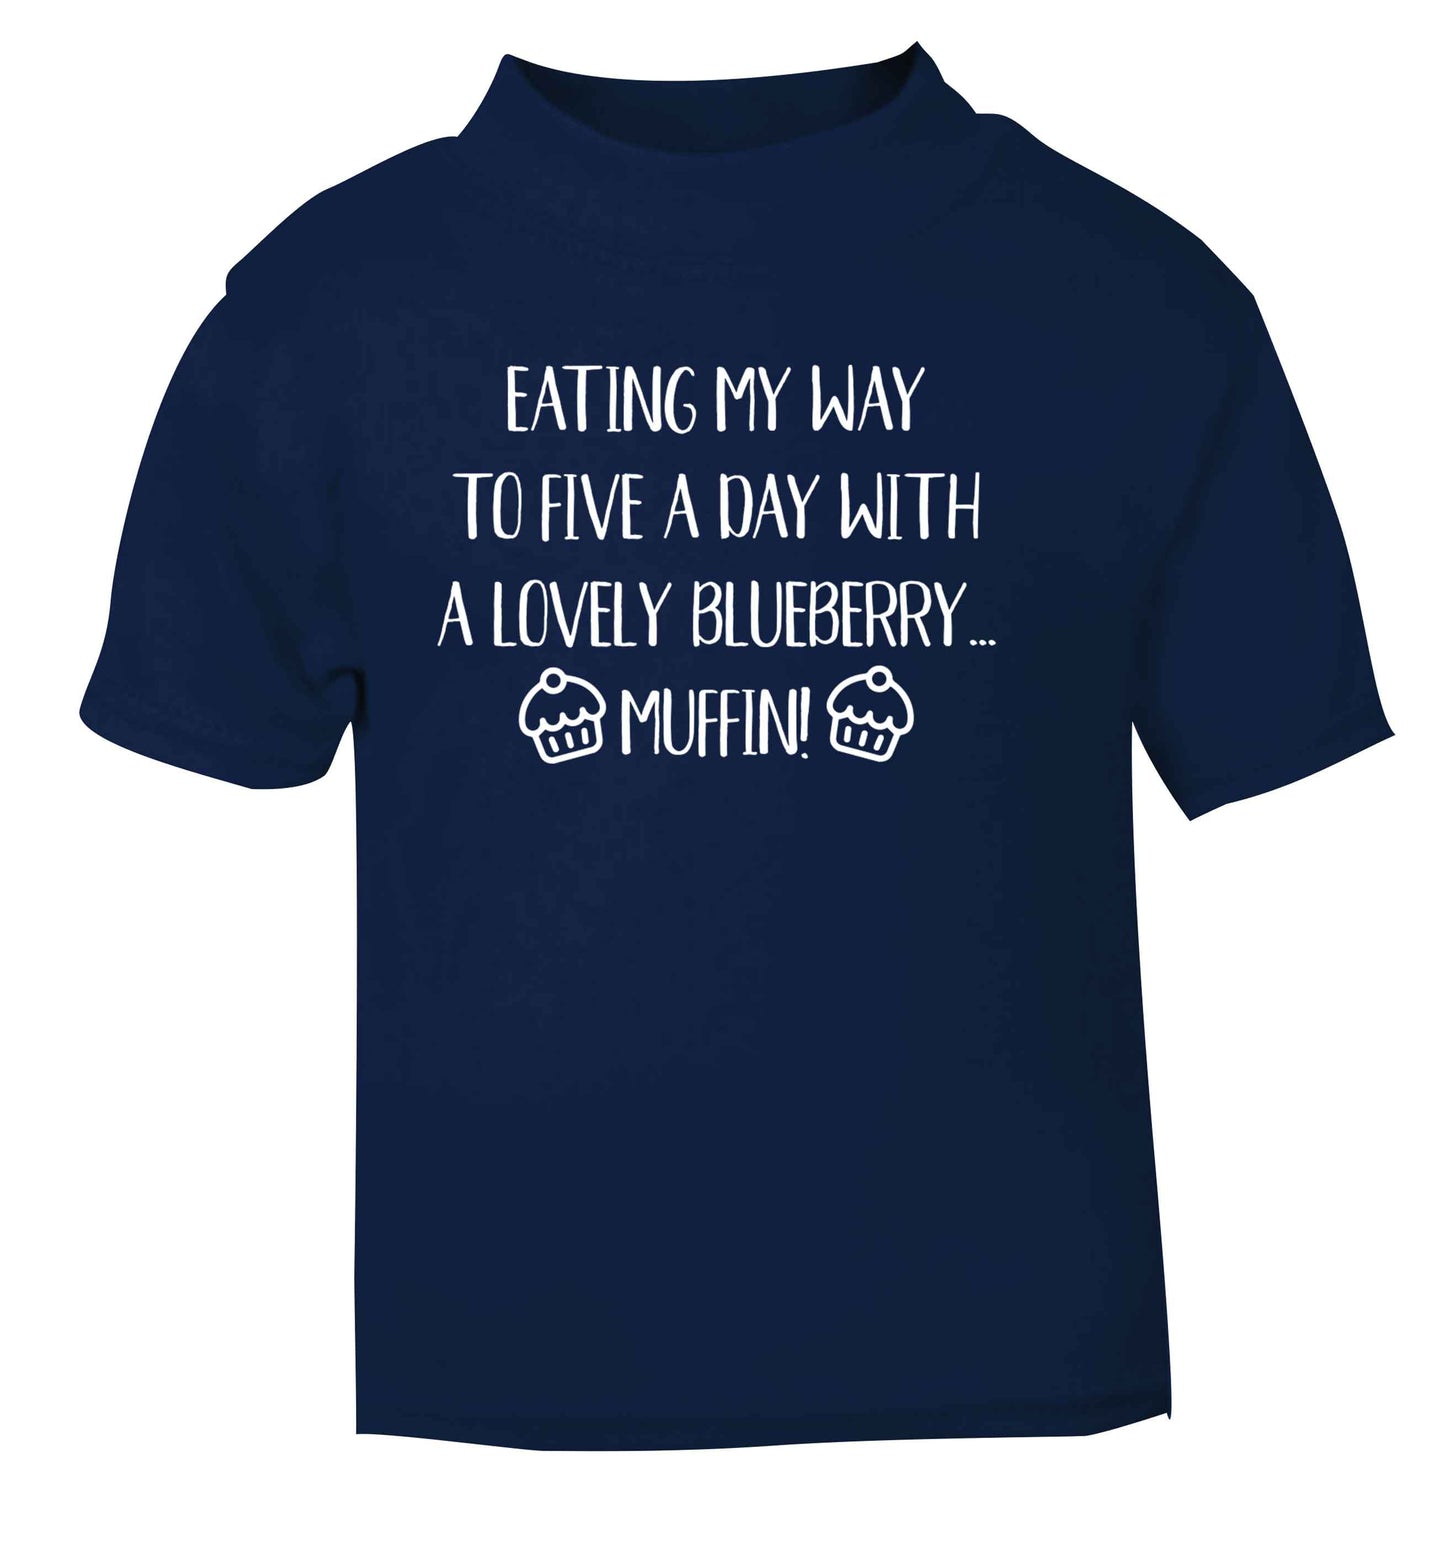 Eating my way to five a day with a lovely blueberry muffin navy Baby Toddler Tshirt 2 Years